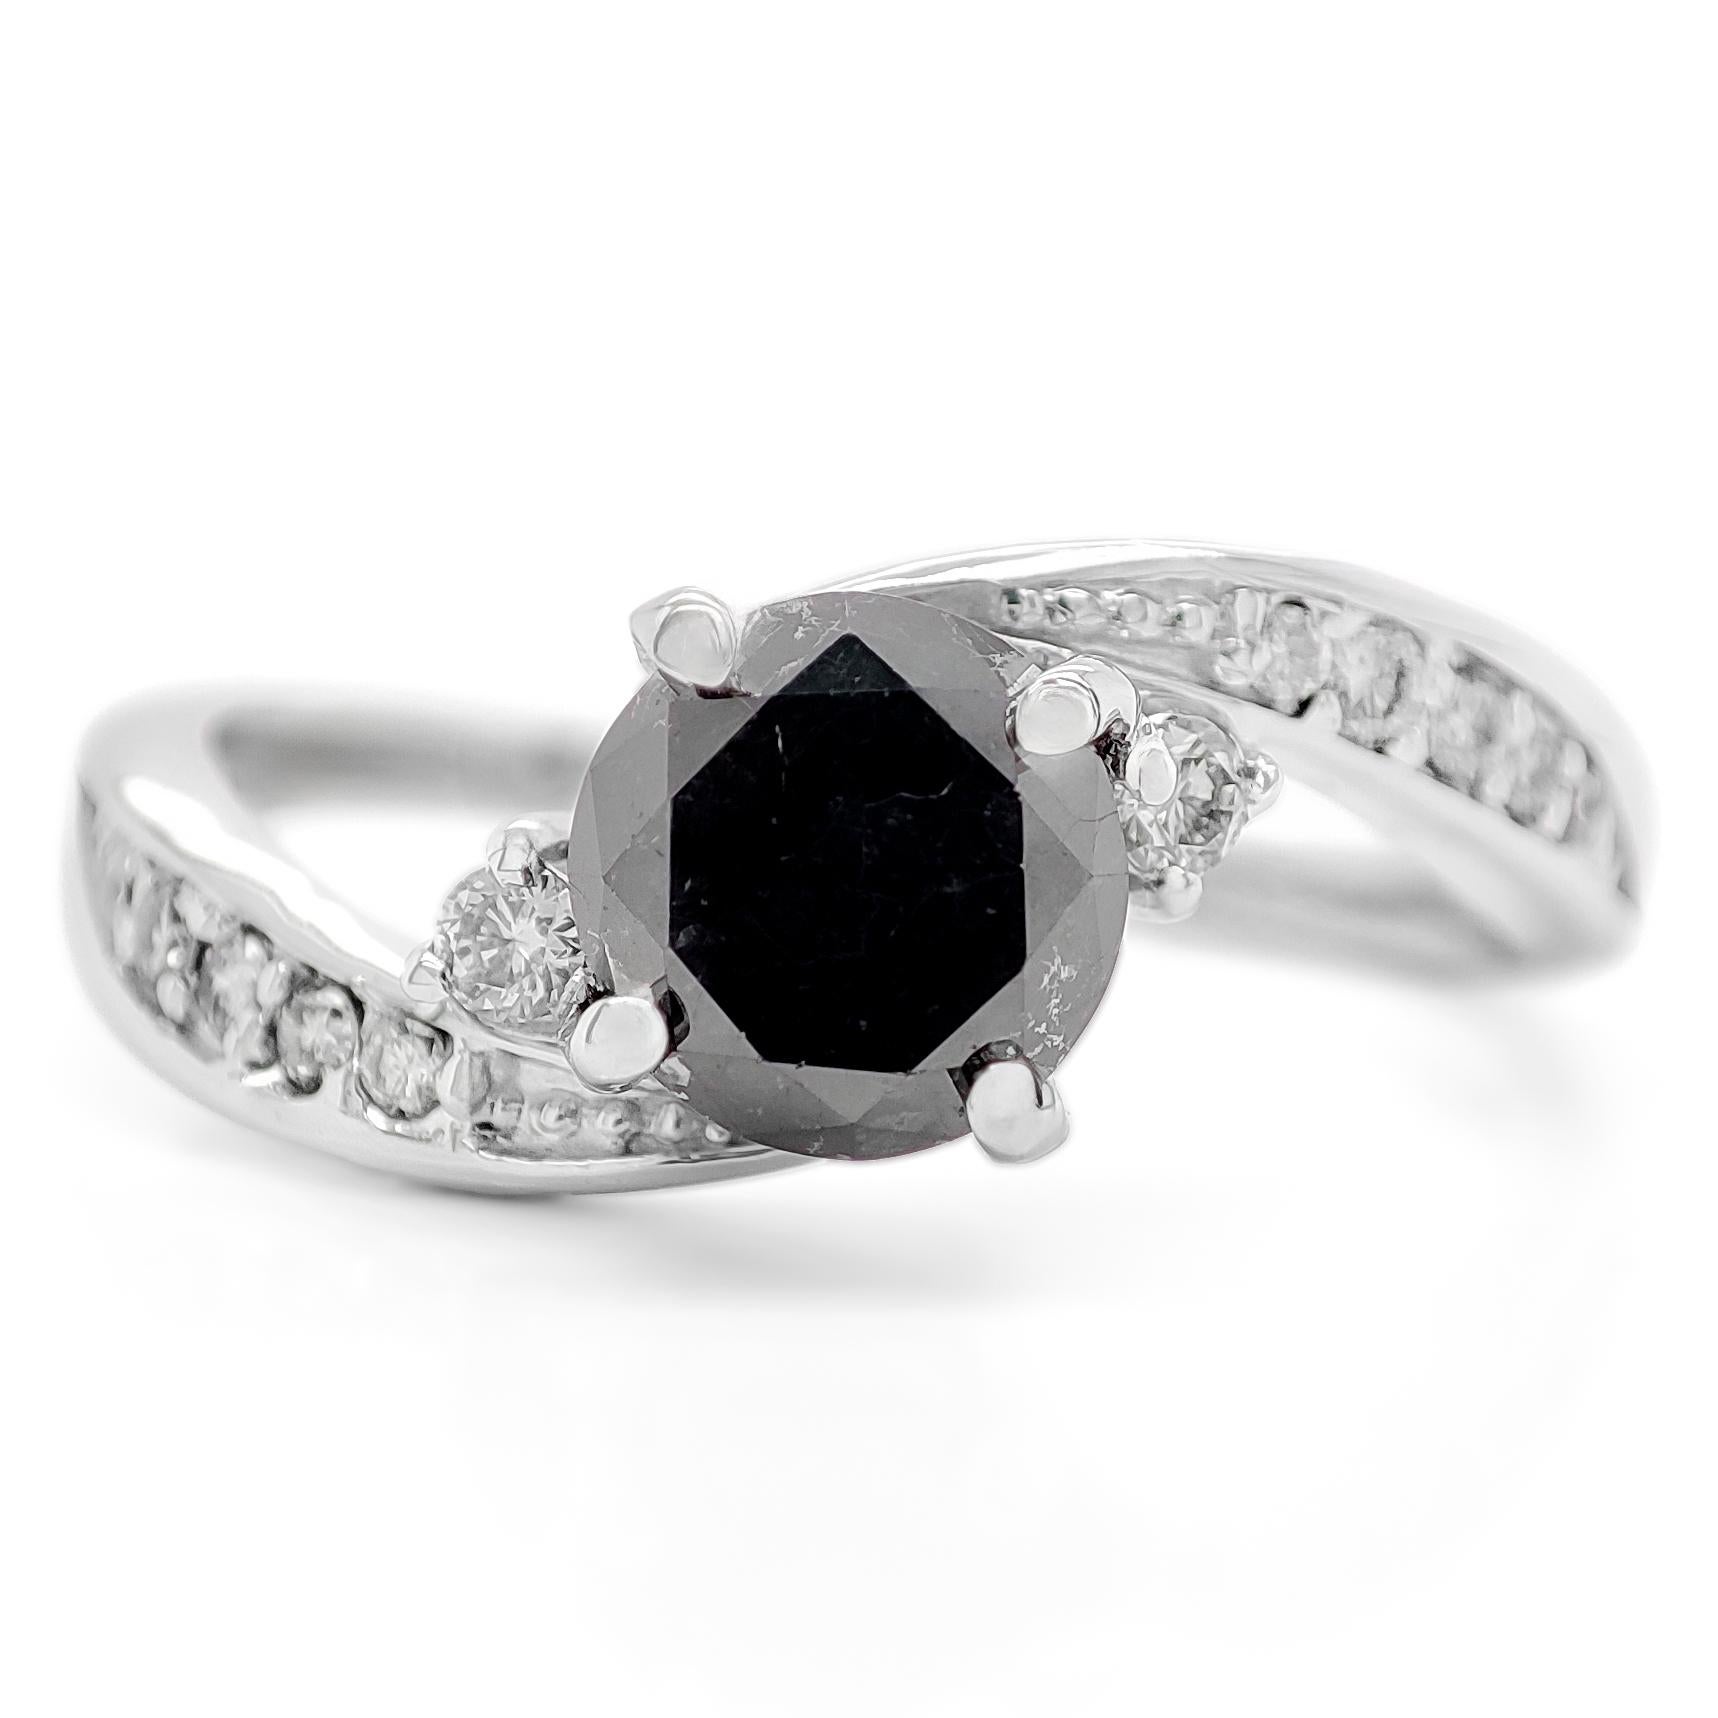 FOR US CUSTOMER NO VAT!

This striking piece showcases a remarkable 0.93 carat fancy black diamond, which has been enhanced to achieve its unique and deep black color.

Complementing the bold black diamond are 12 round brilliant-cut diamonds,